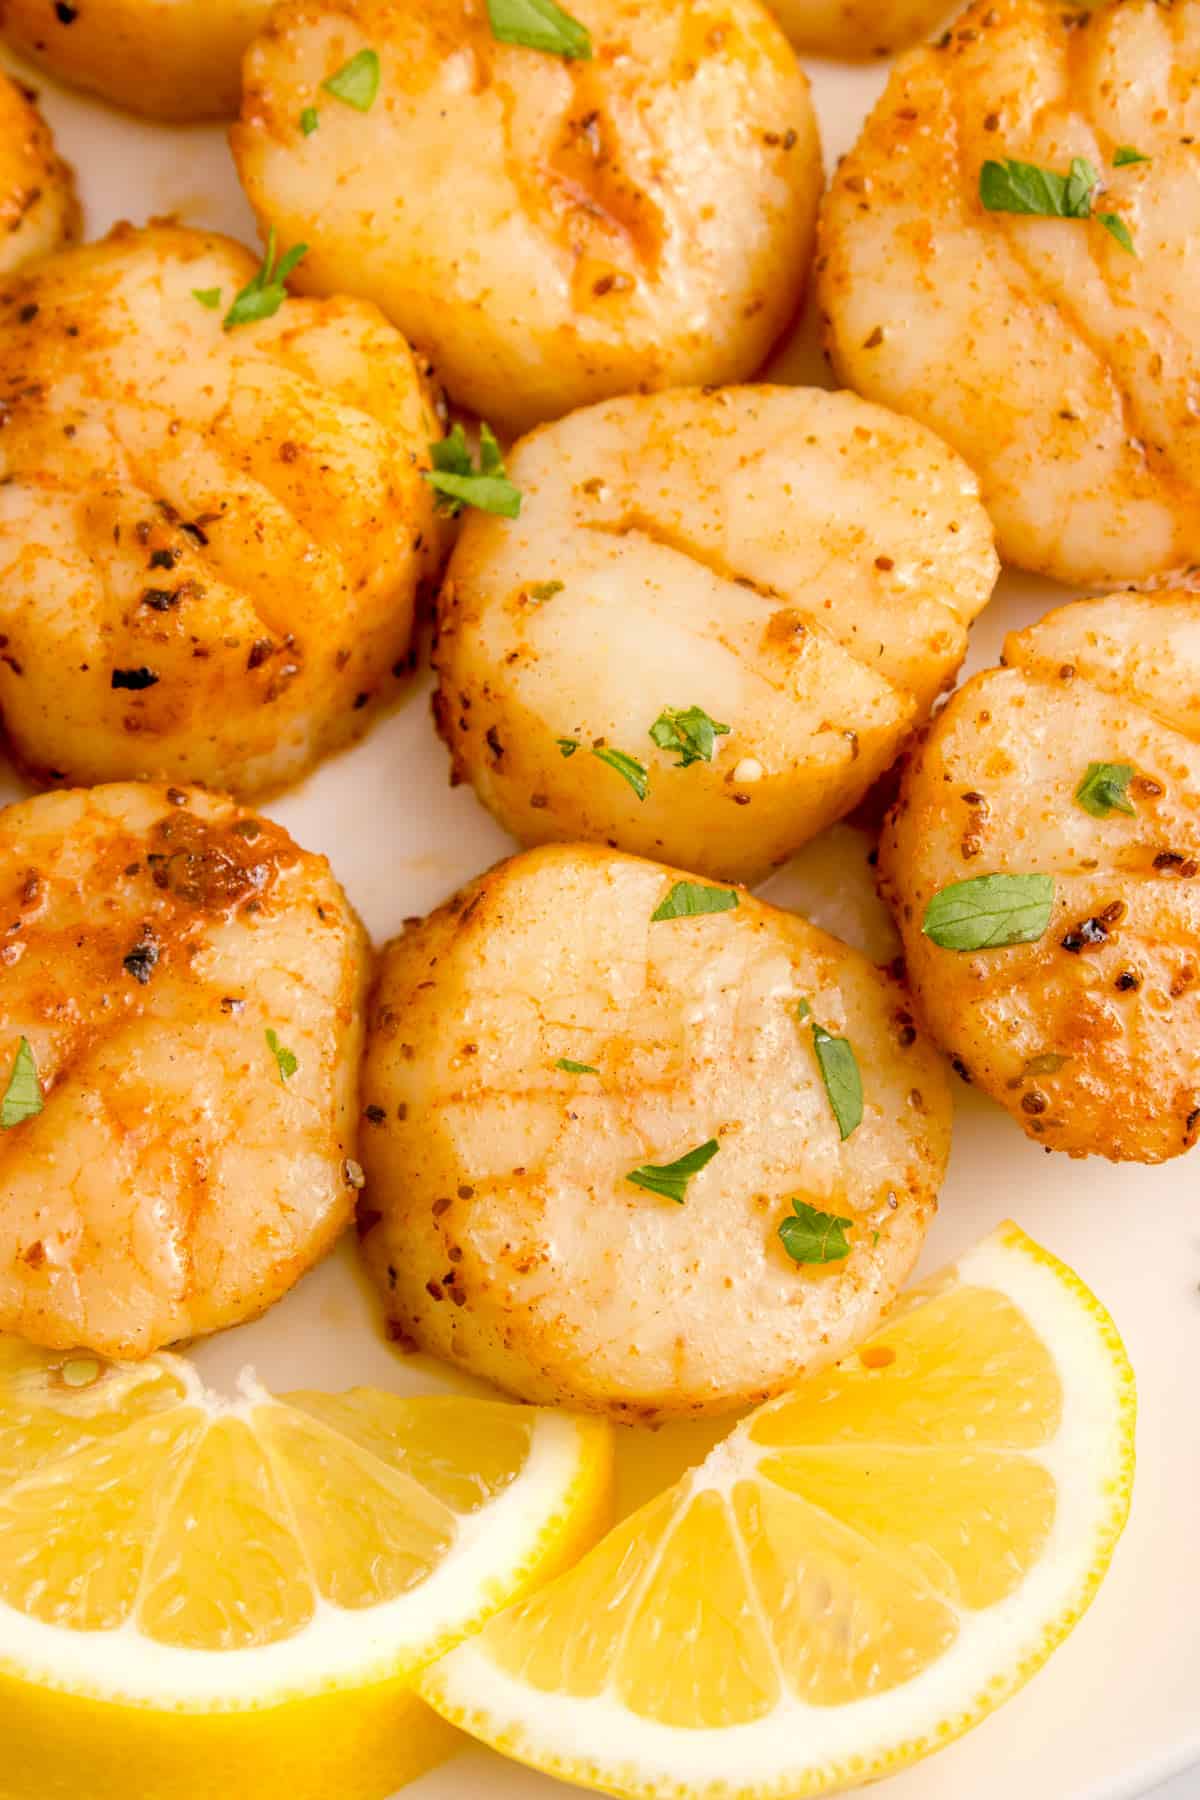 A closeup of some scallops with lemon slices.